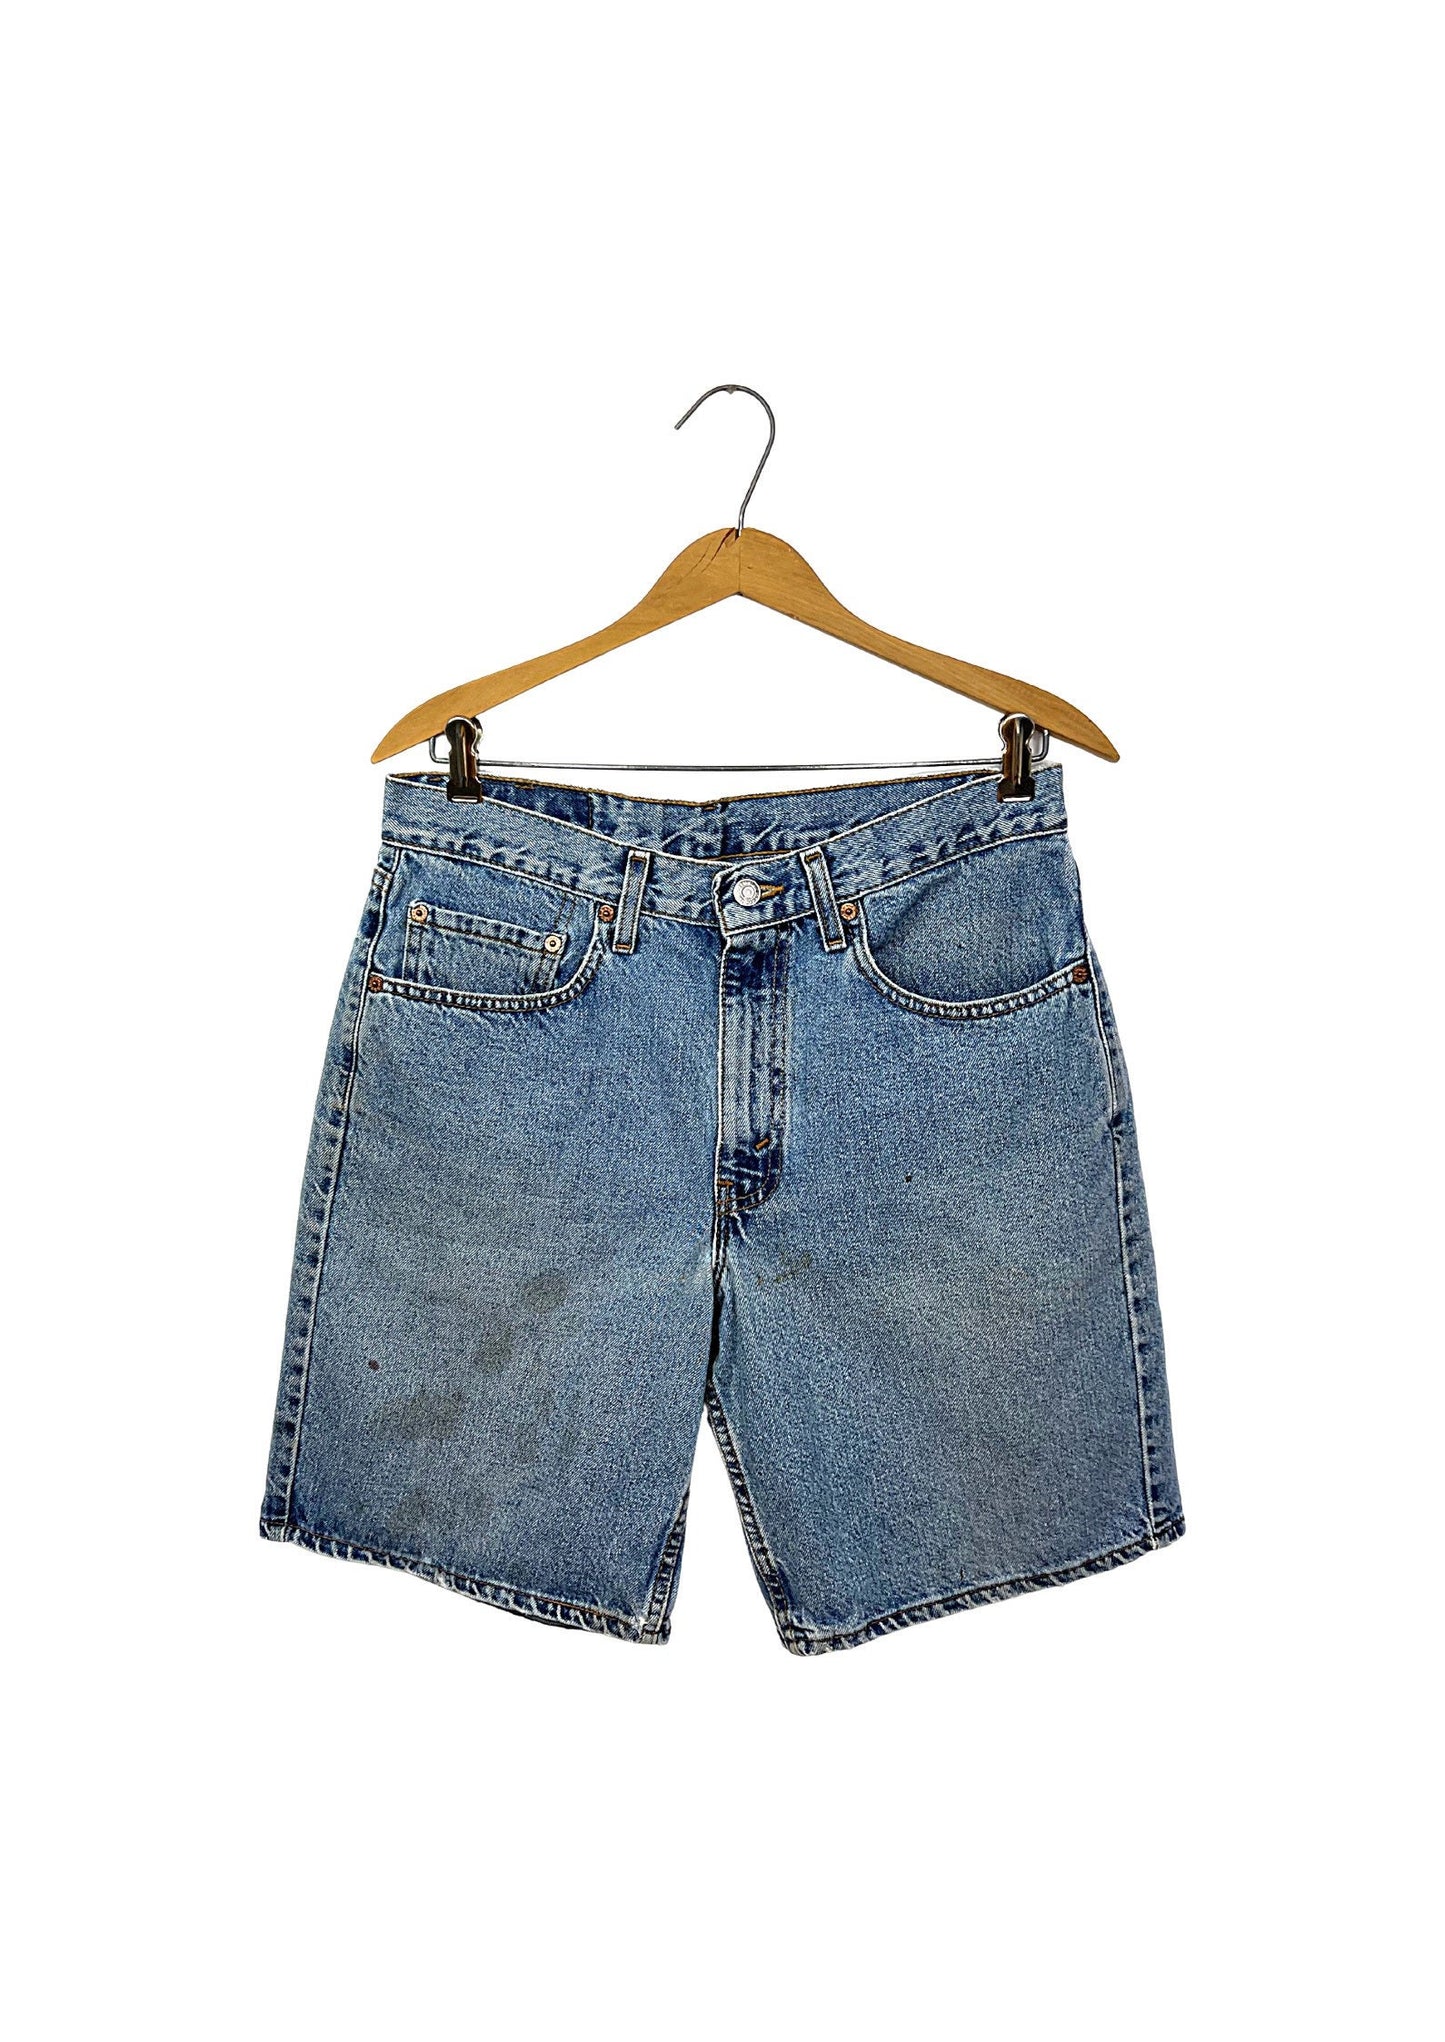 90's Levi 550 Red Tab Beat Up Jean Shorts Size 32